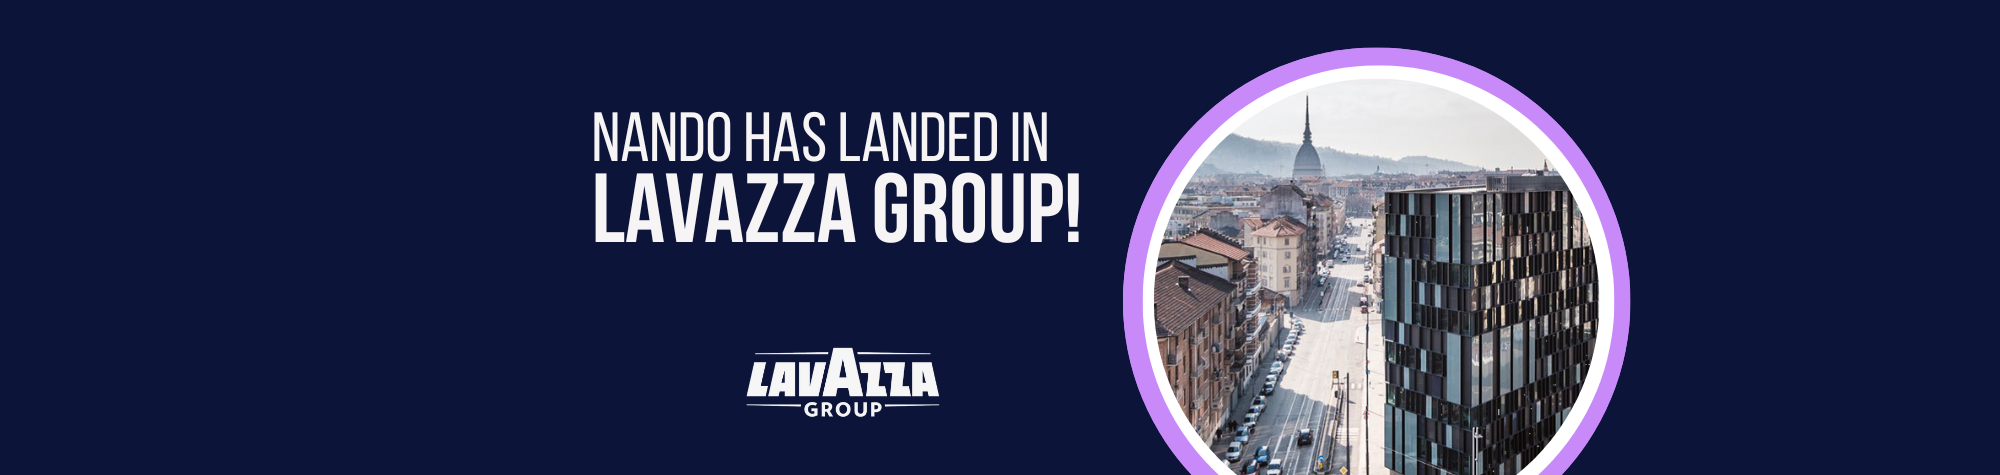 NANDO has landed in Lavazza Group!